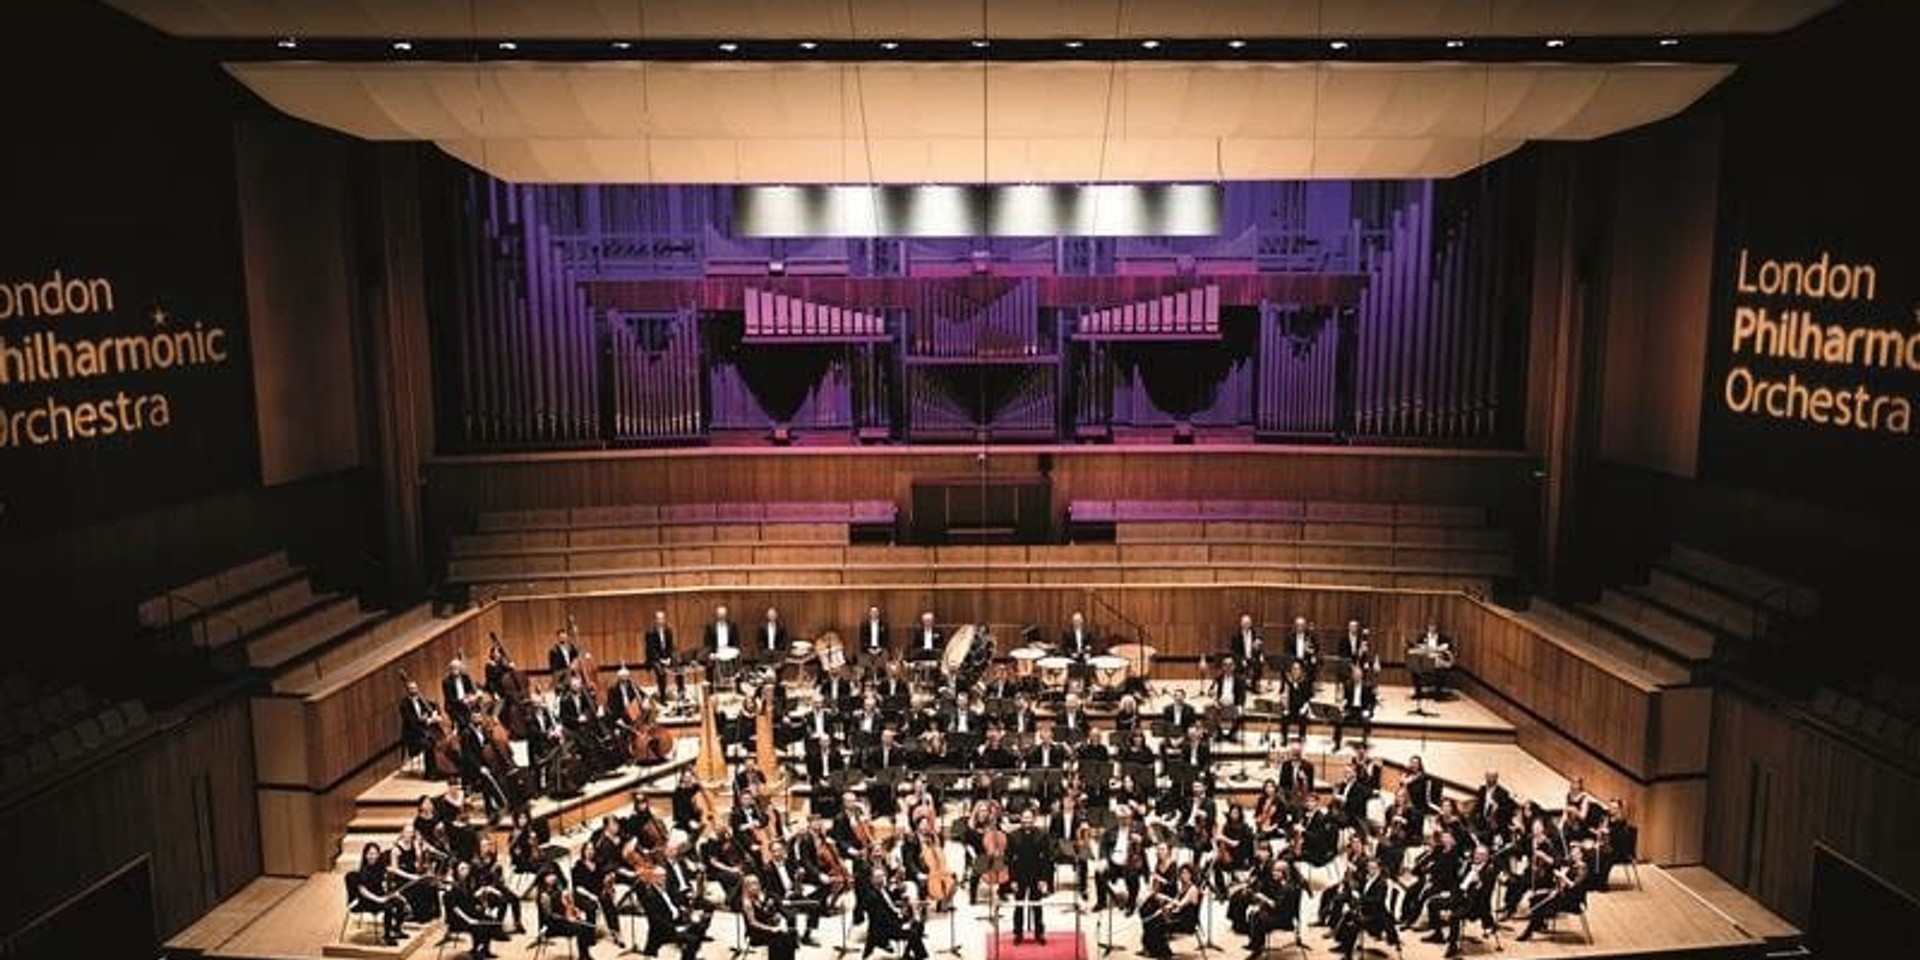 London Philharmonic Orchestra releases Singapore-inspired symphony recording globally